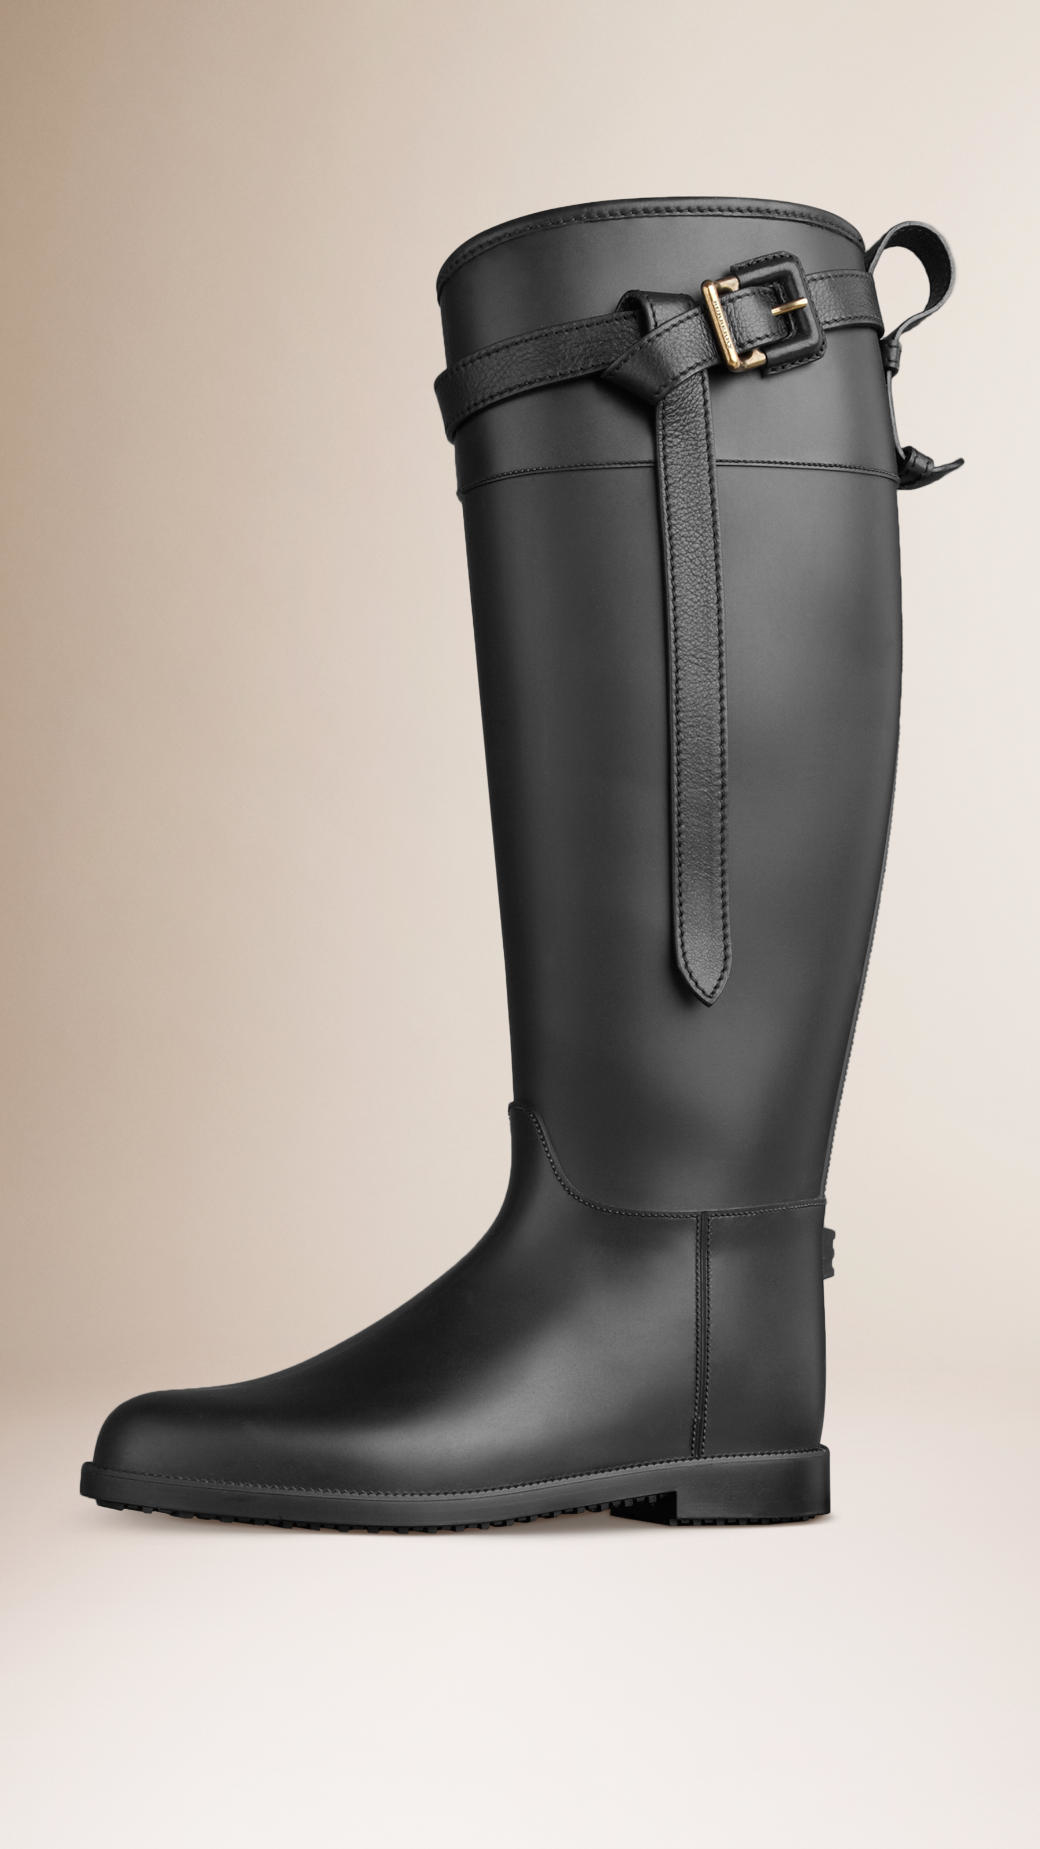 Burberry Belted Equestrian Rain Boots in Black - Lyst